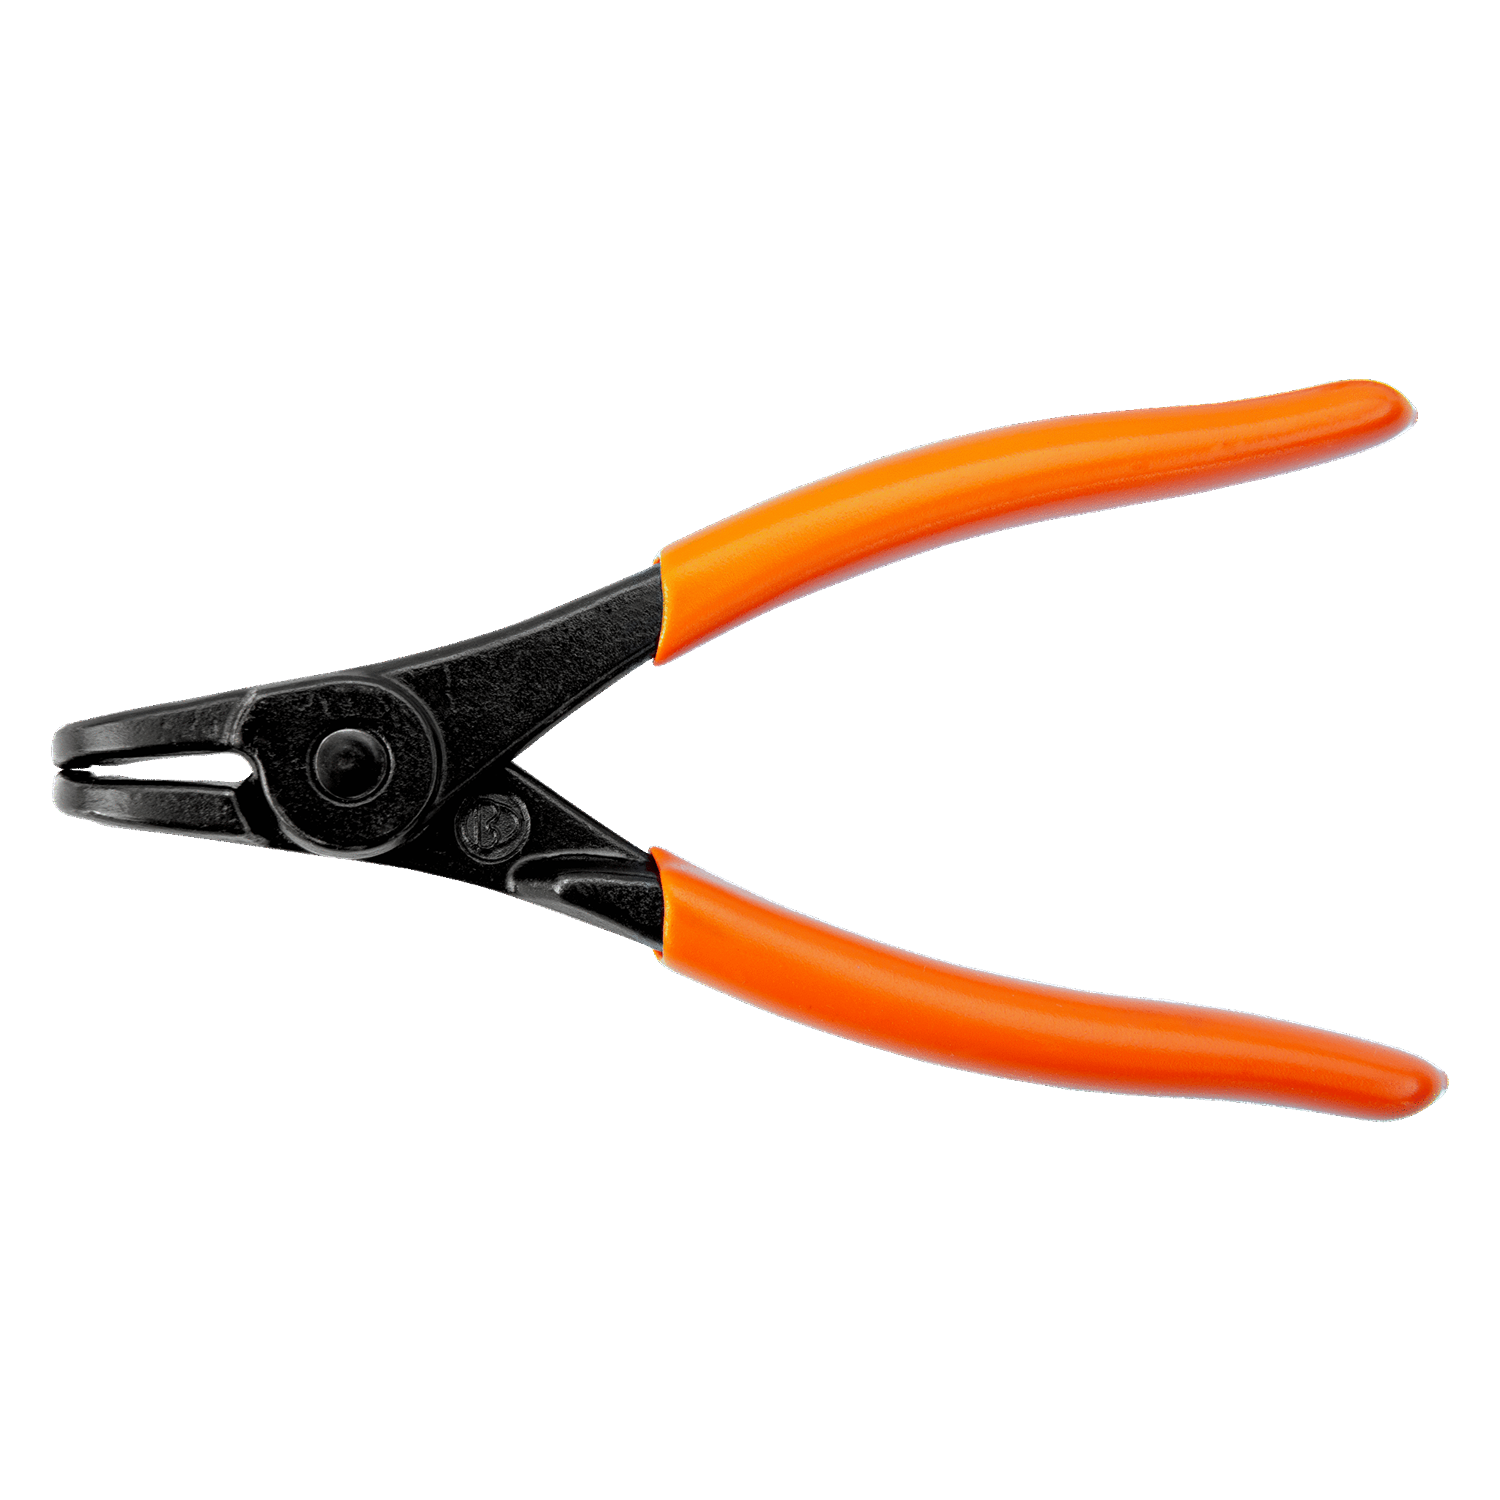 BAHCO 2990 External Circlip Plier with 90° Offset Jaws - Premium Circlip Plier from BAHCO - Shop now at Yew Aik.